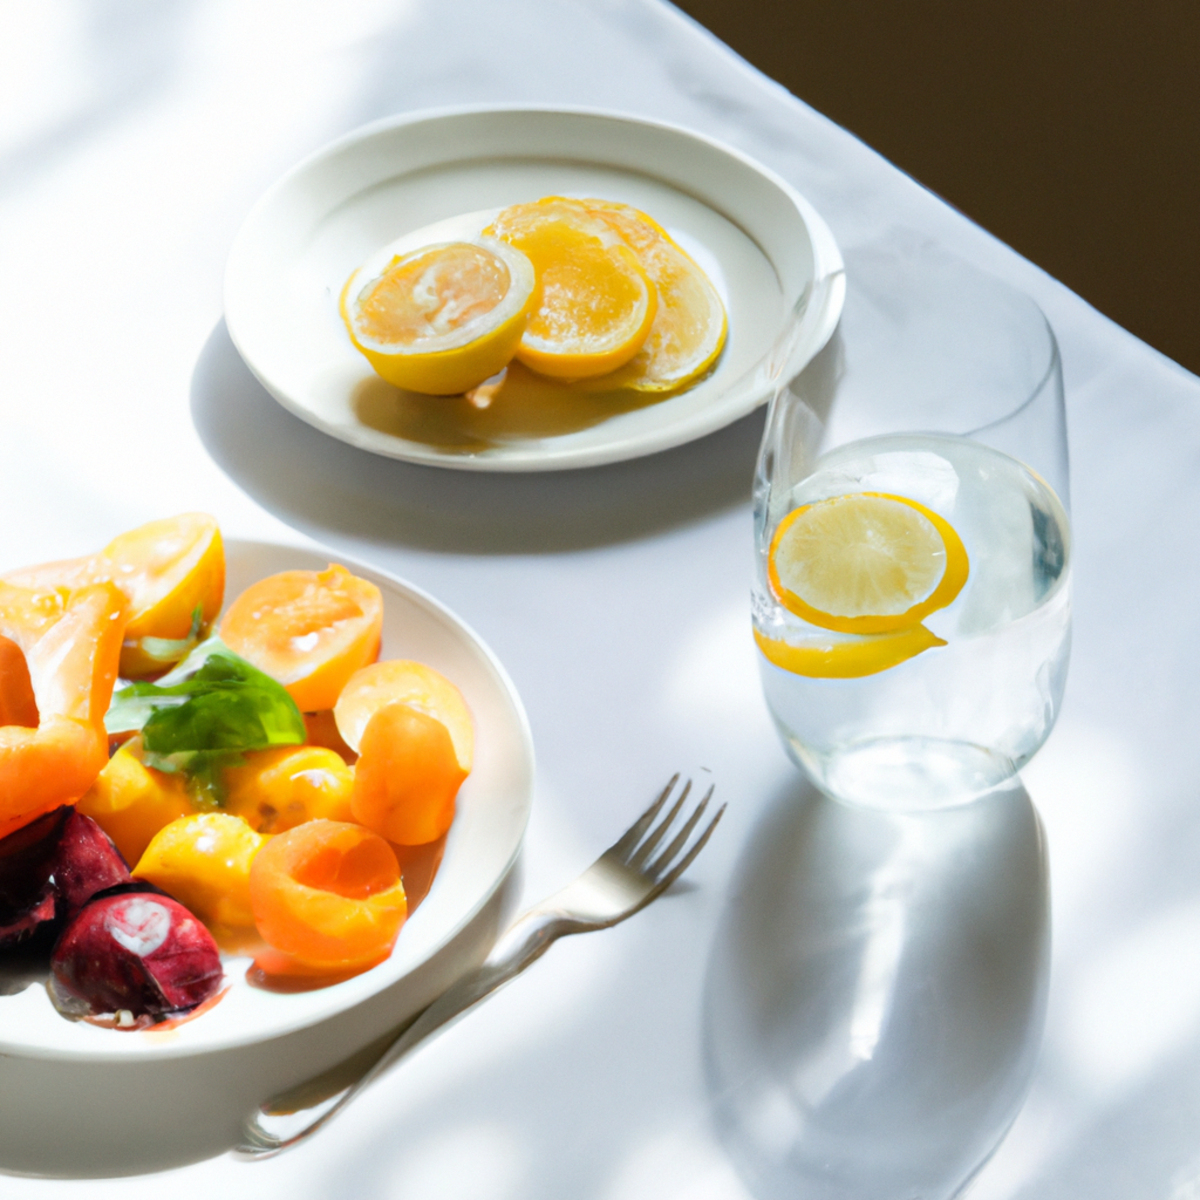 Healthy and balanced meal with fresh fruits, vegetables, and water on a pristine white tablecloth - Rumination syndrome